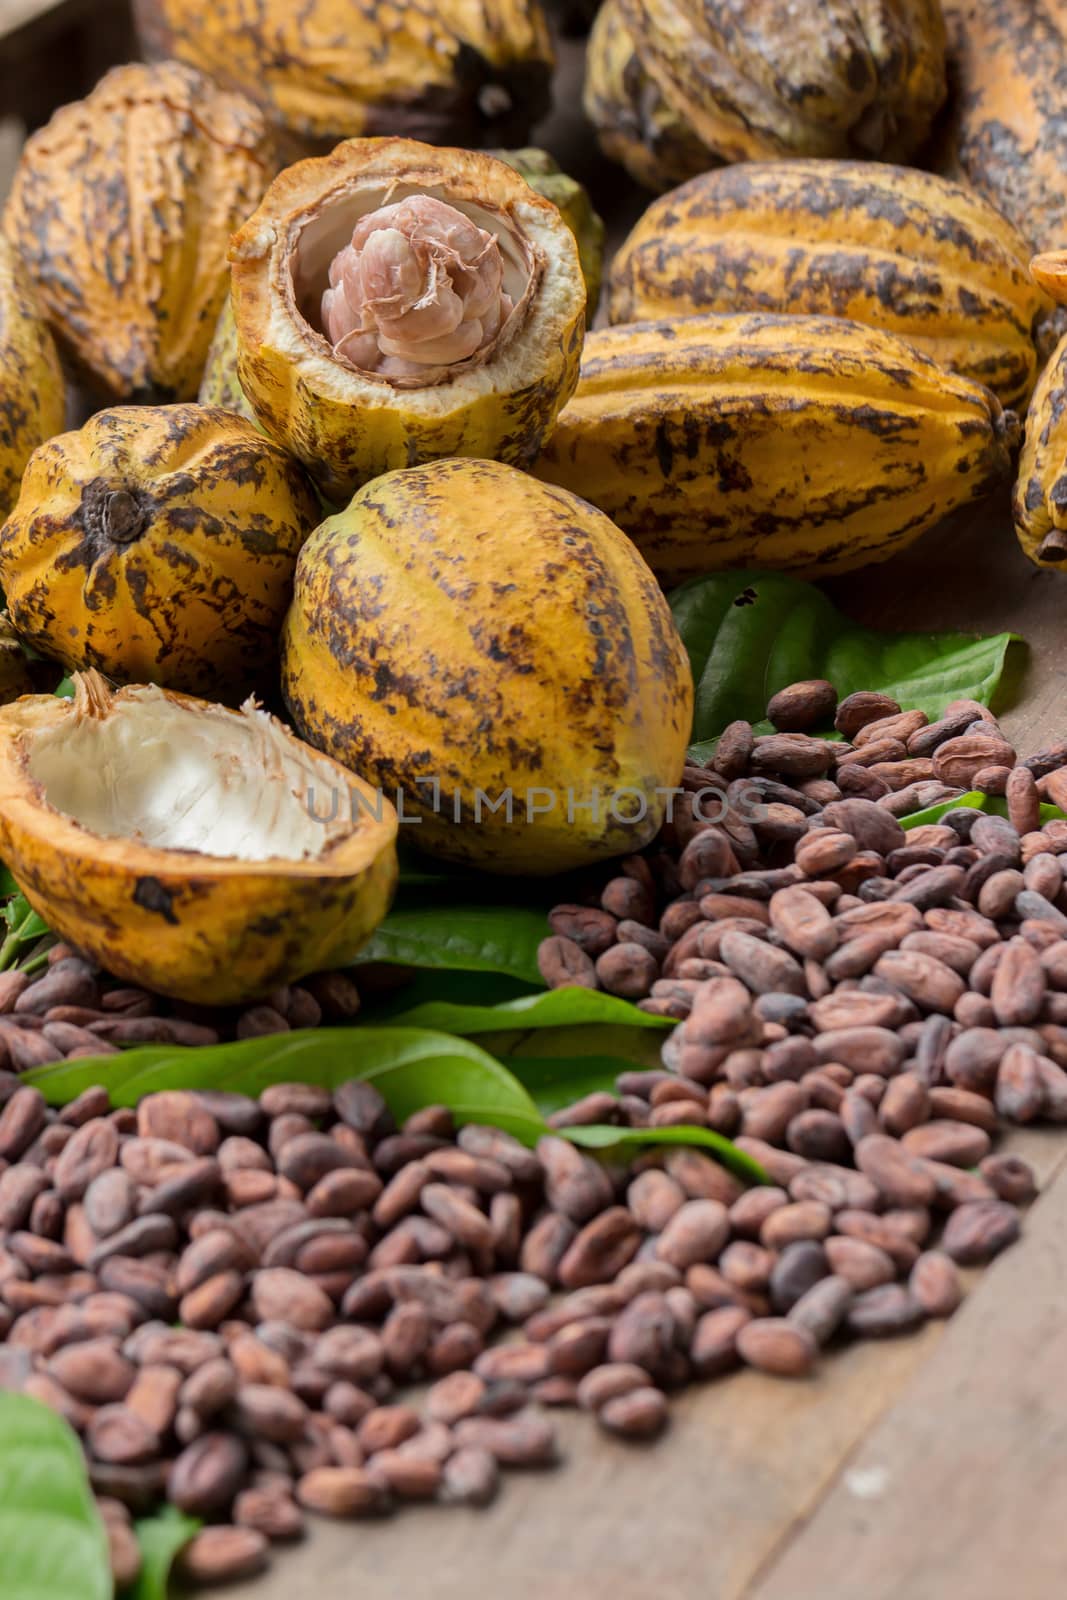 Raw Cocoa beans and cocoa pod on a wooden surface.